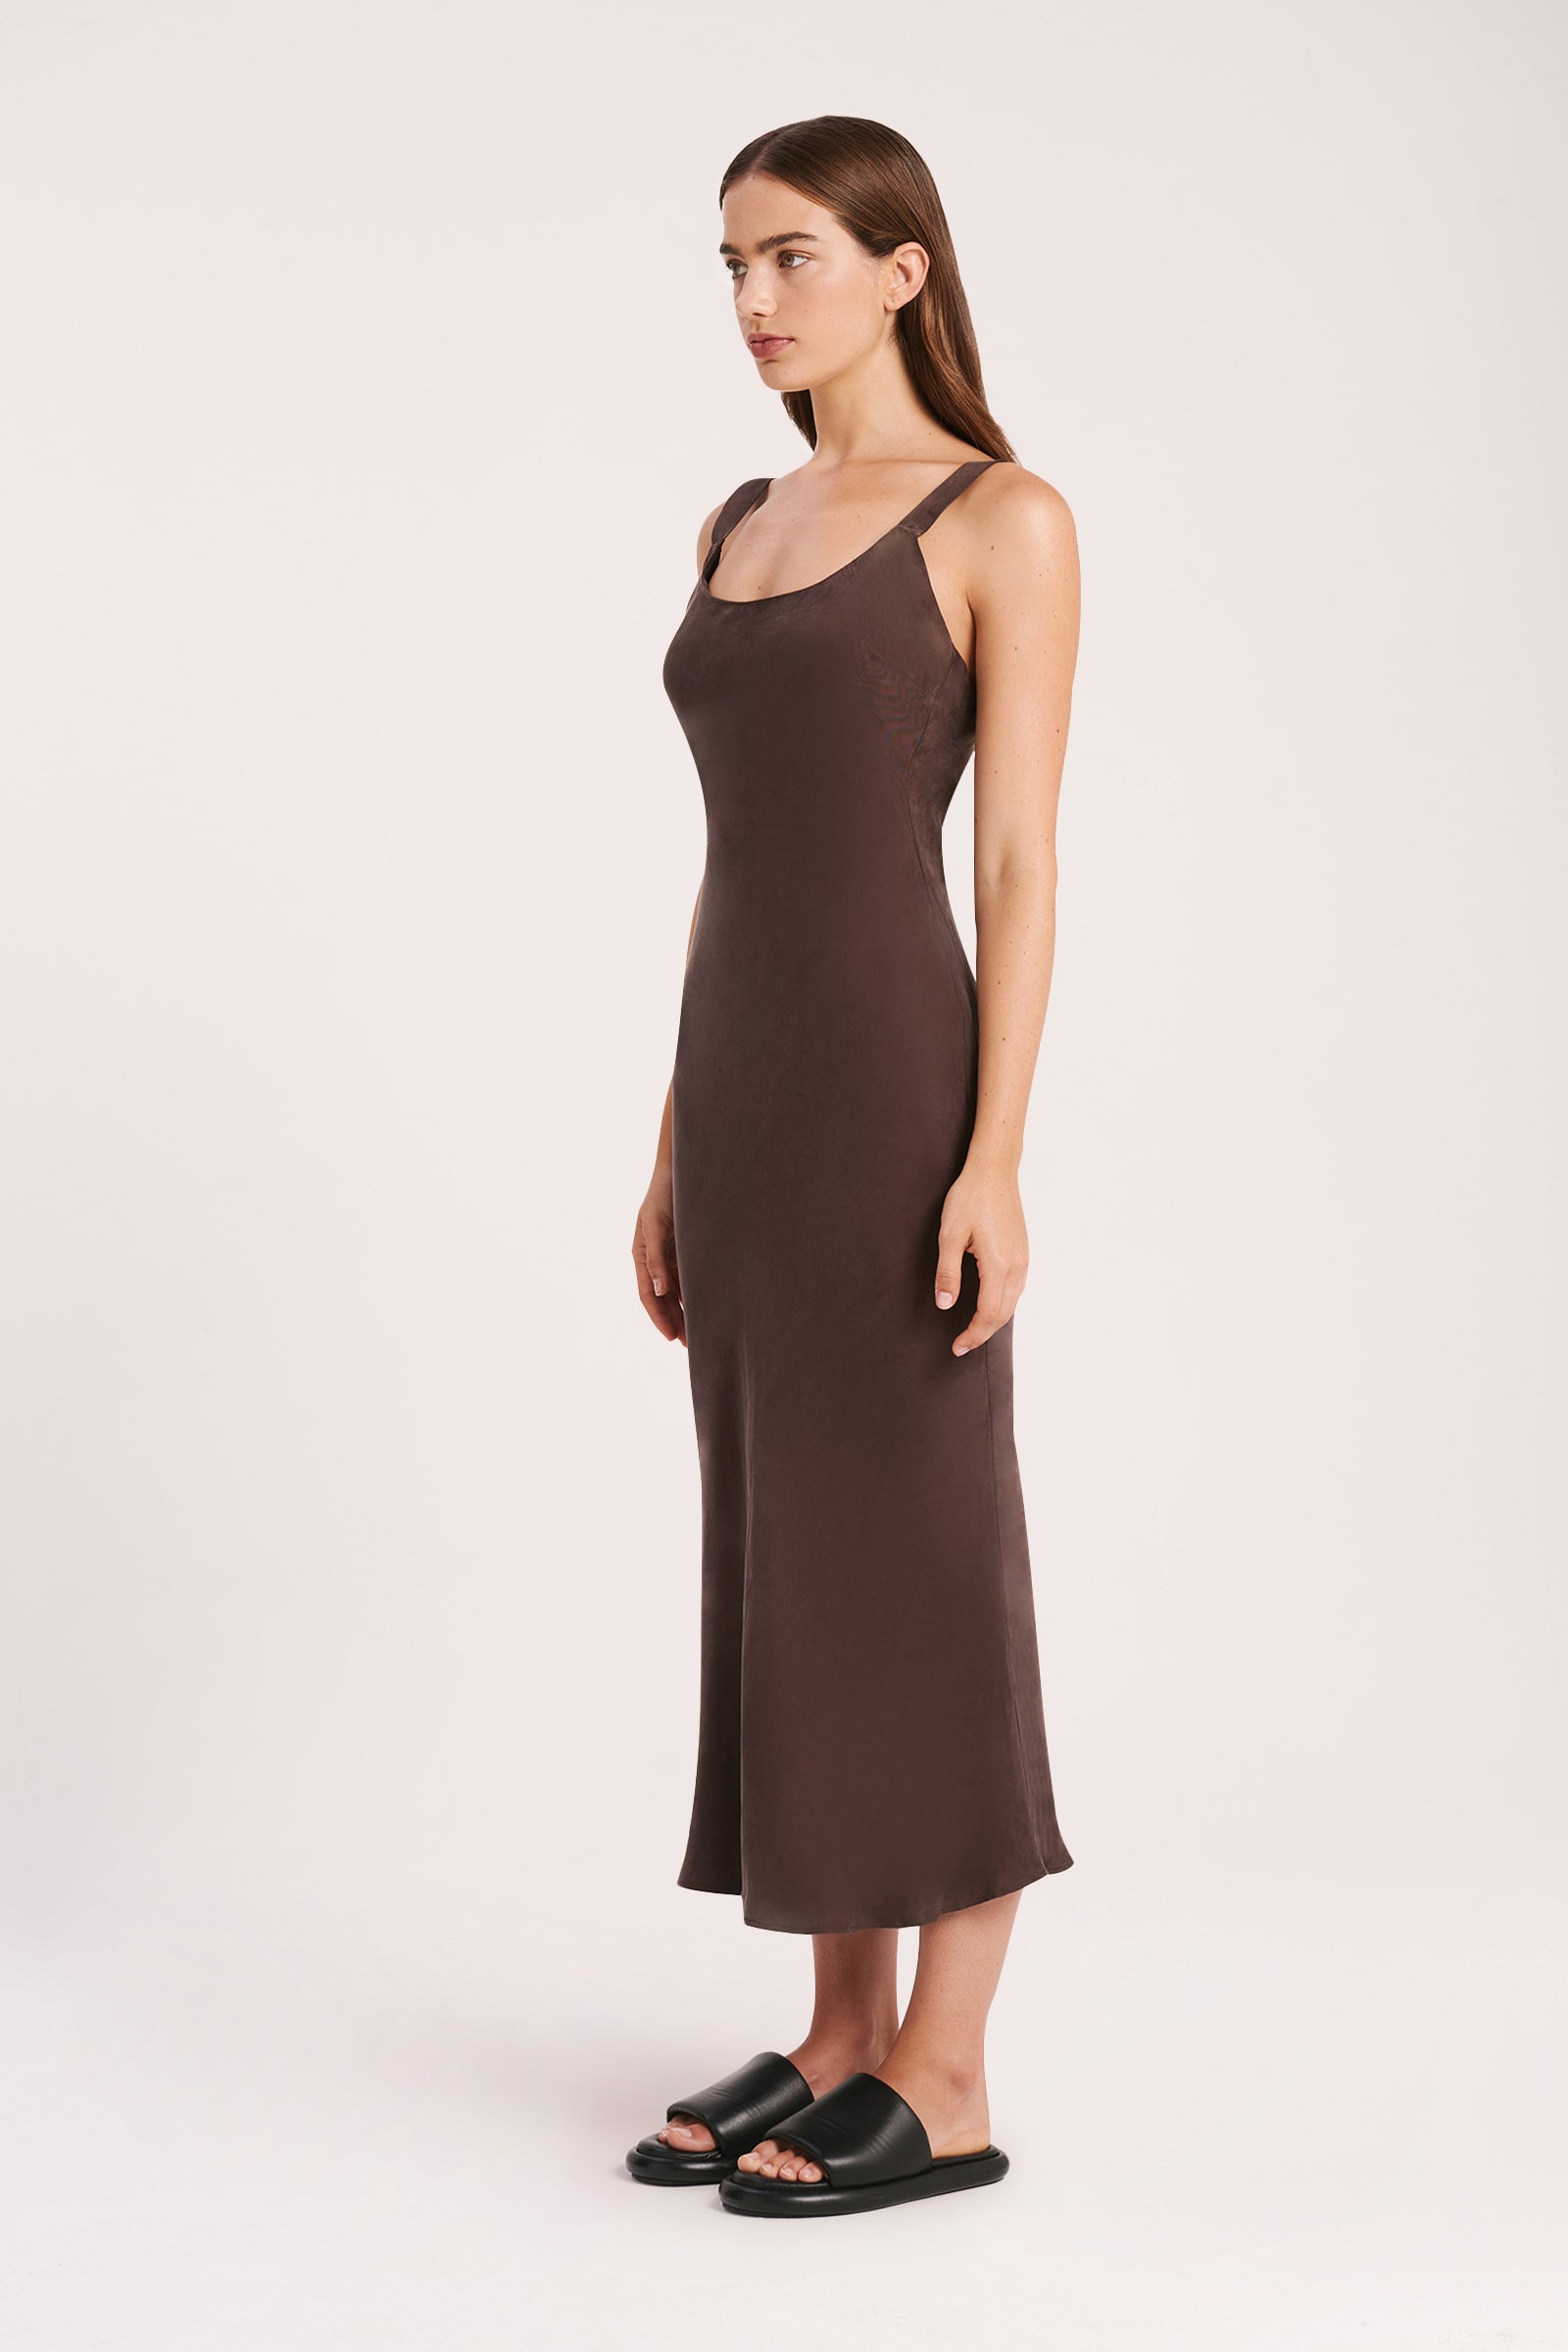 Nude Lucy Ren Cupro Slip Dress In A Brown Cinder Colour 